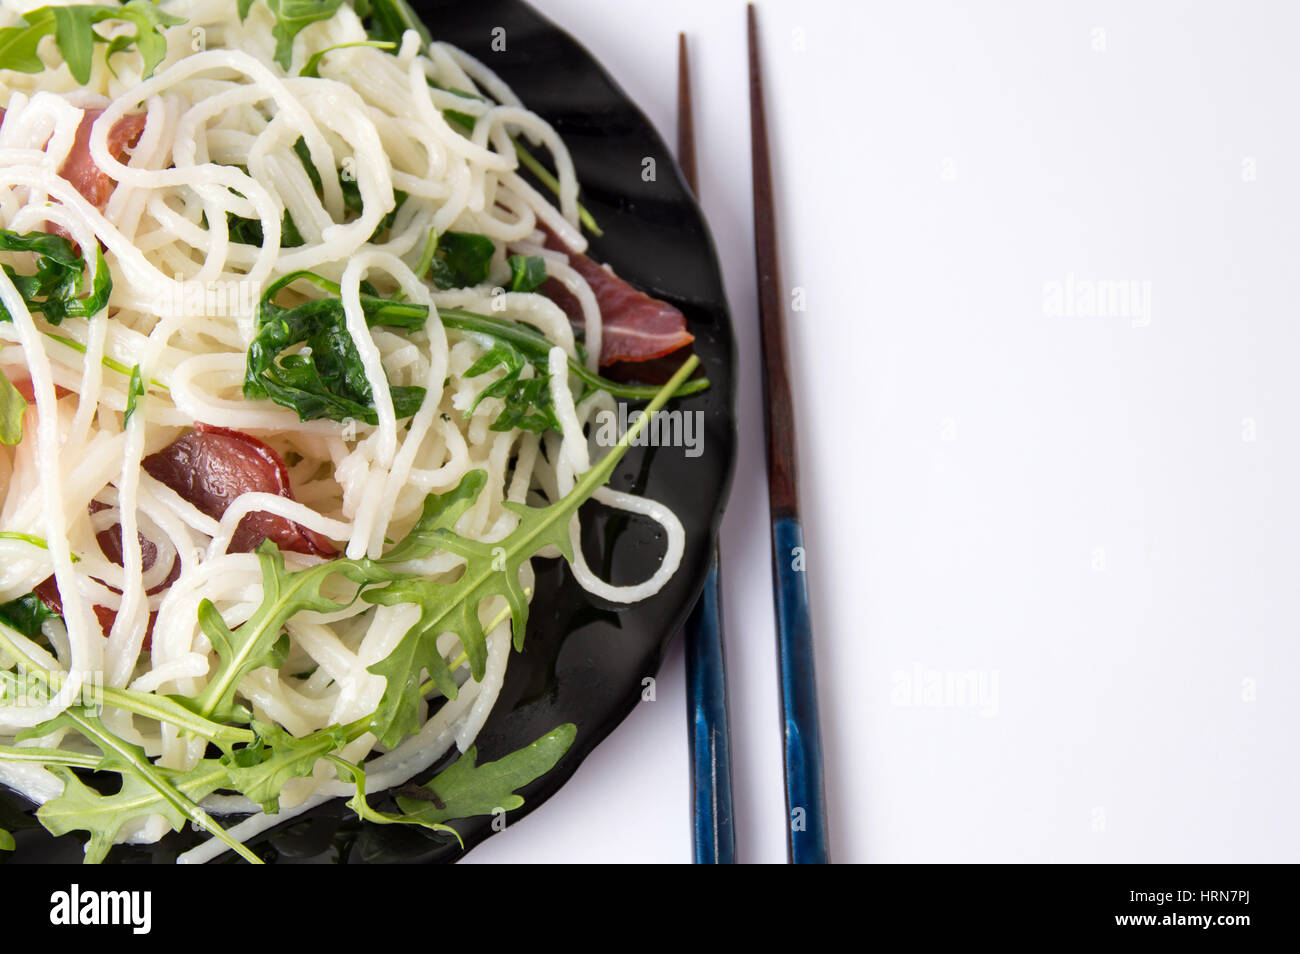 Pasta with prosciutto and arugula vegetable on a plate on white Stock Photo